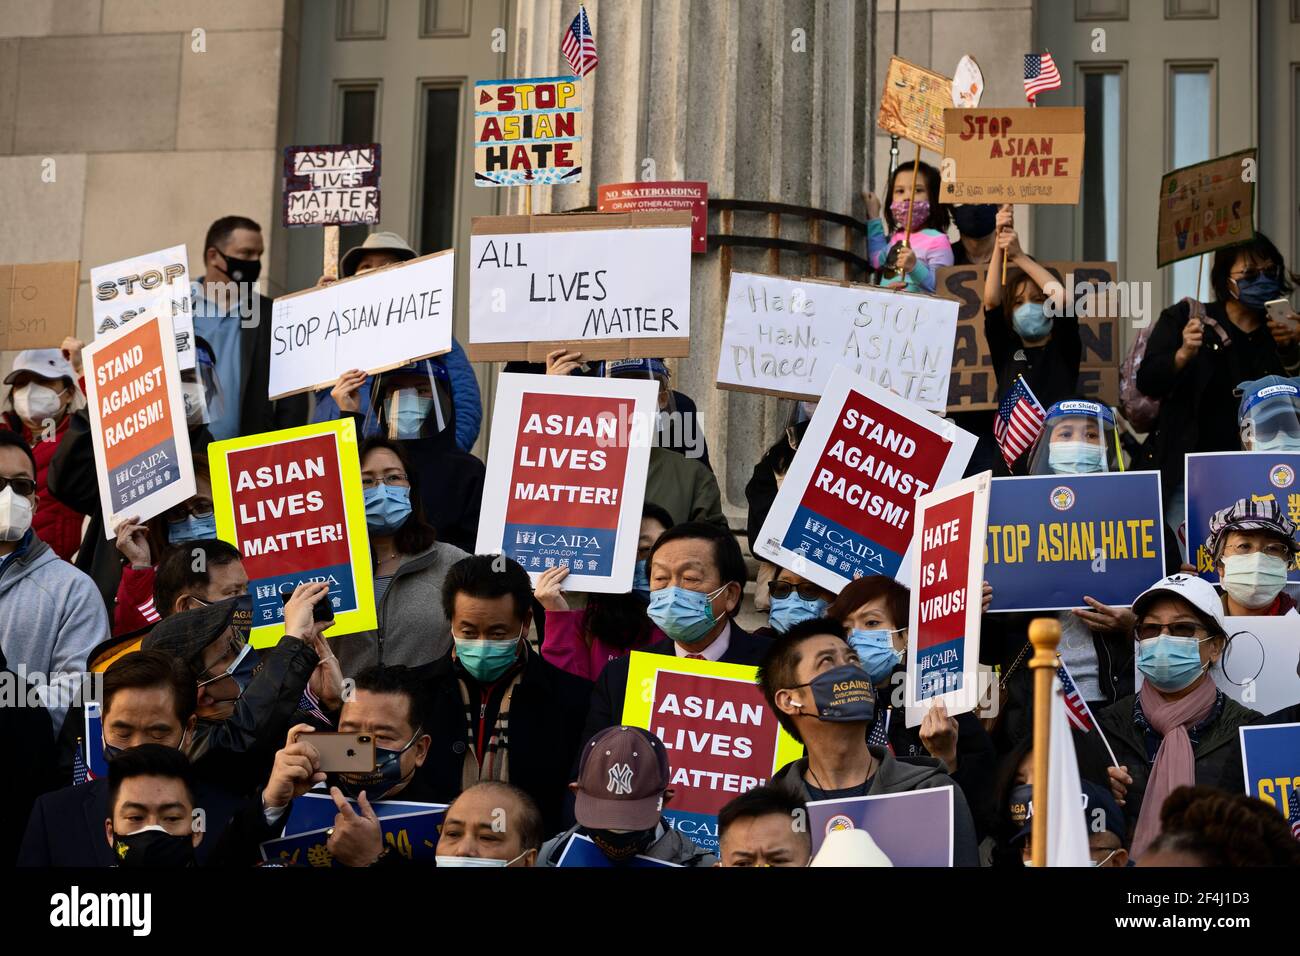 Brooklyn, New York, USA. 21 March 2021 People on steps of Brooklyn Borough Hall rally against violence and discrimination after recent attacks against Asian-Americans in New York City and across the U.S. during the COVID-19  pandemic. Credit: Joseph Reid/Alamy Live News Stock Photo